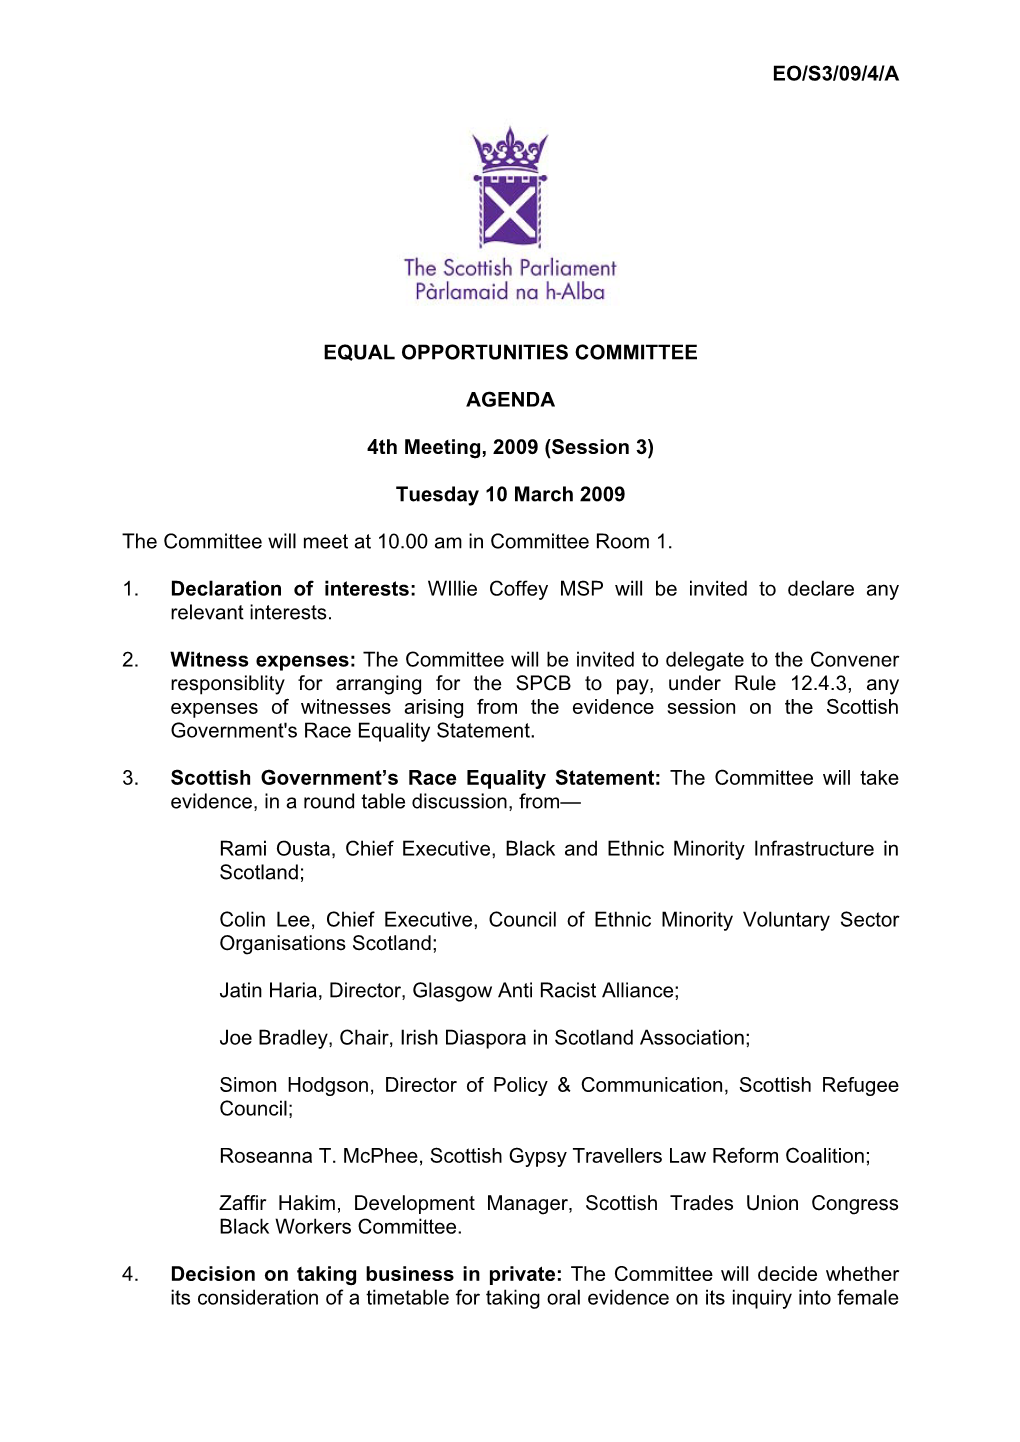 Eo/S3/09/4/A Equal Opportunities Committee